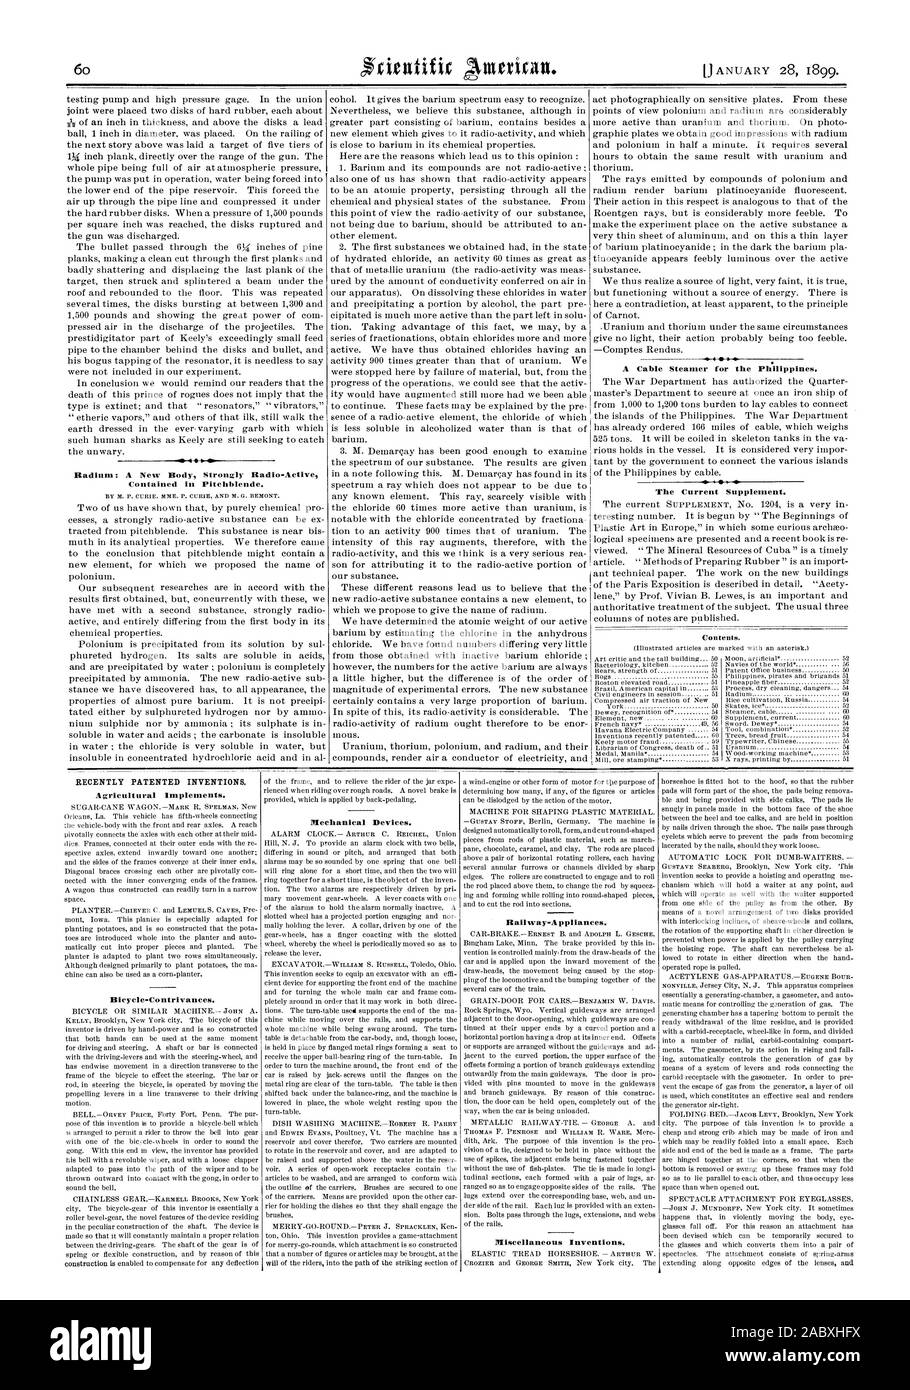 Radium: A New Body Strongly Radio-Active Contained in Pitchblende. 0-4 04 e A Cable Steamer for the Philippines. The Current Supplement. Contents. RECENTLY PATENTED INVENTIONS. Agricultural Implements. Bicycle-Contrivances. Mechanical Devices. Railway-Appliances. Miscellaneous Inventions., scientific american, 1899-01-11 Stock Photo